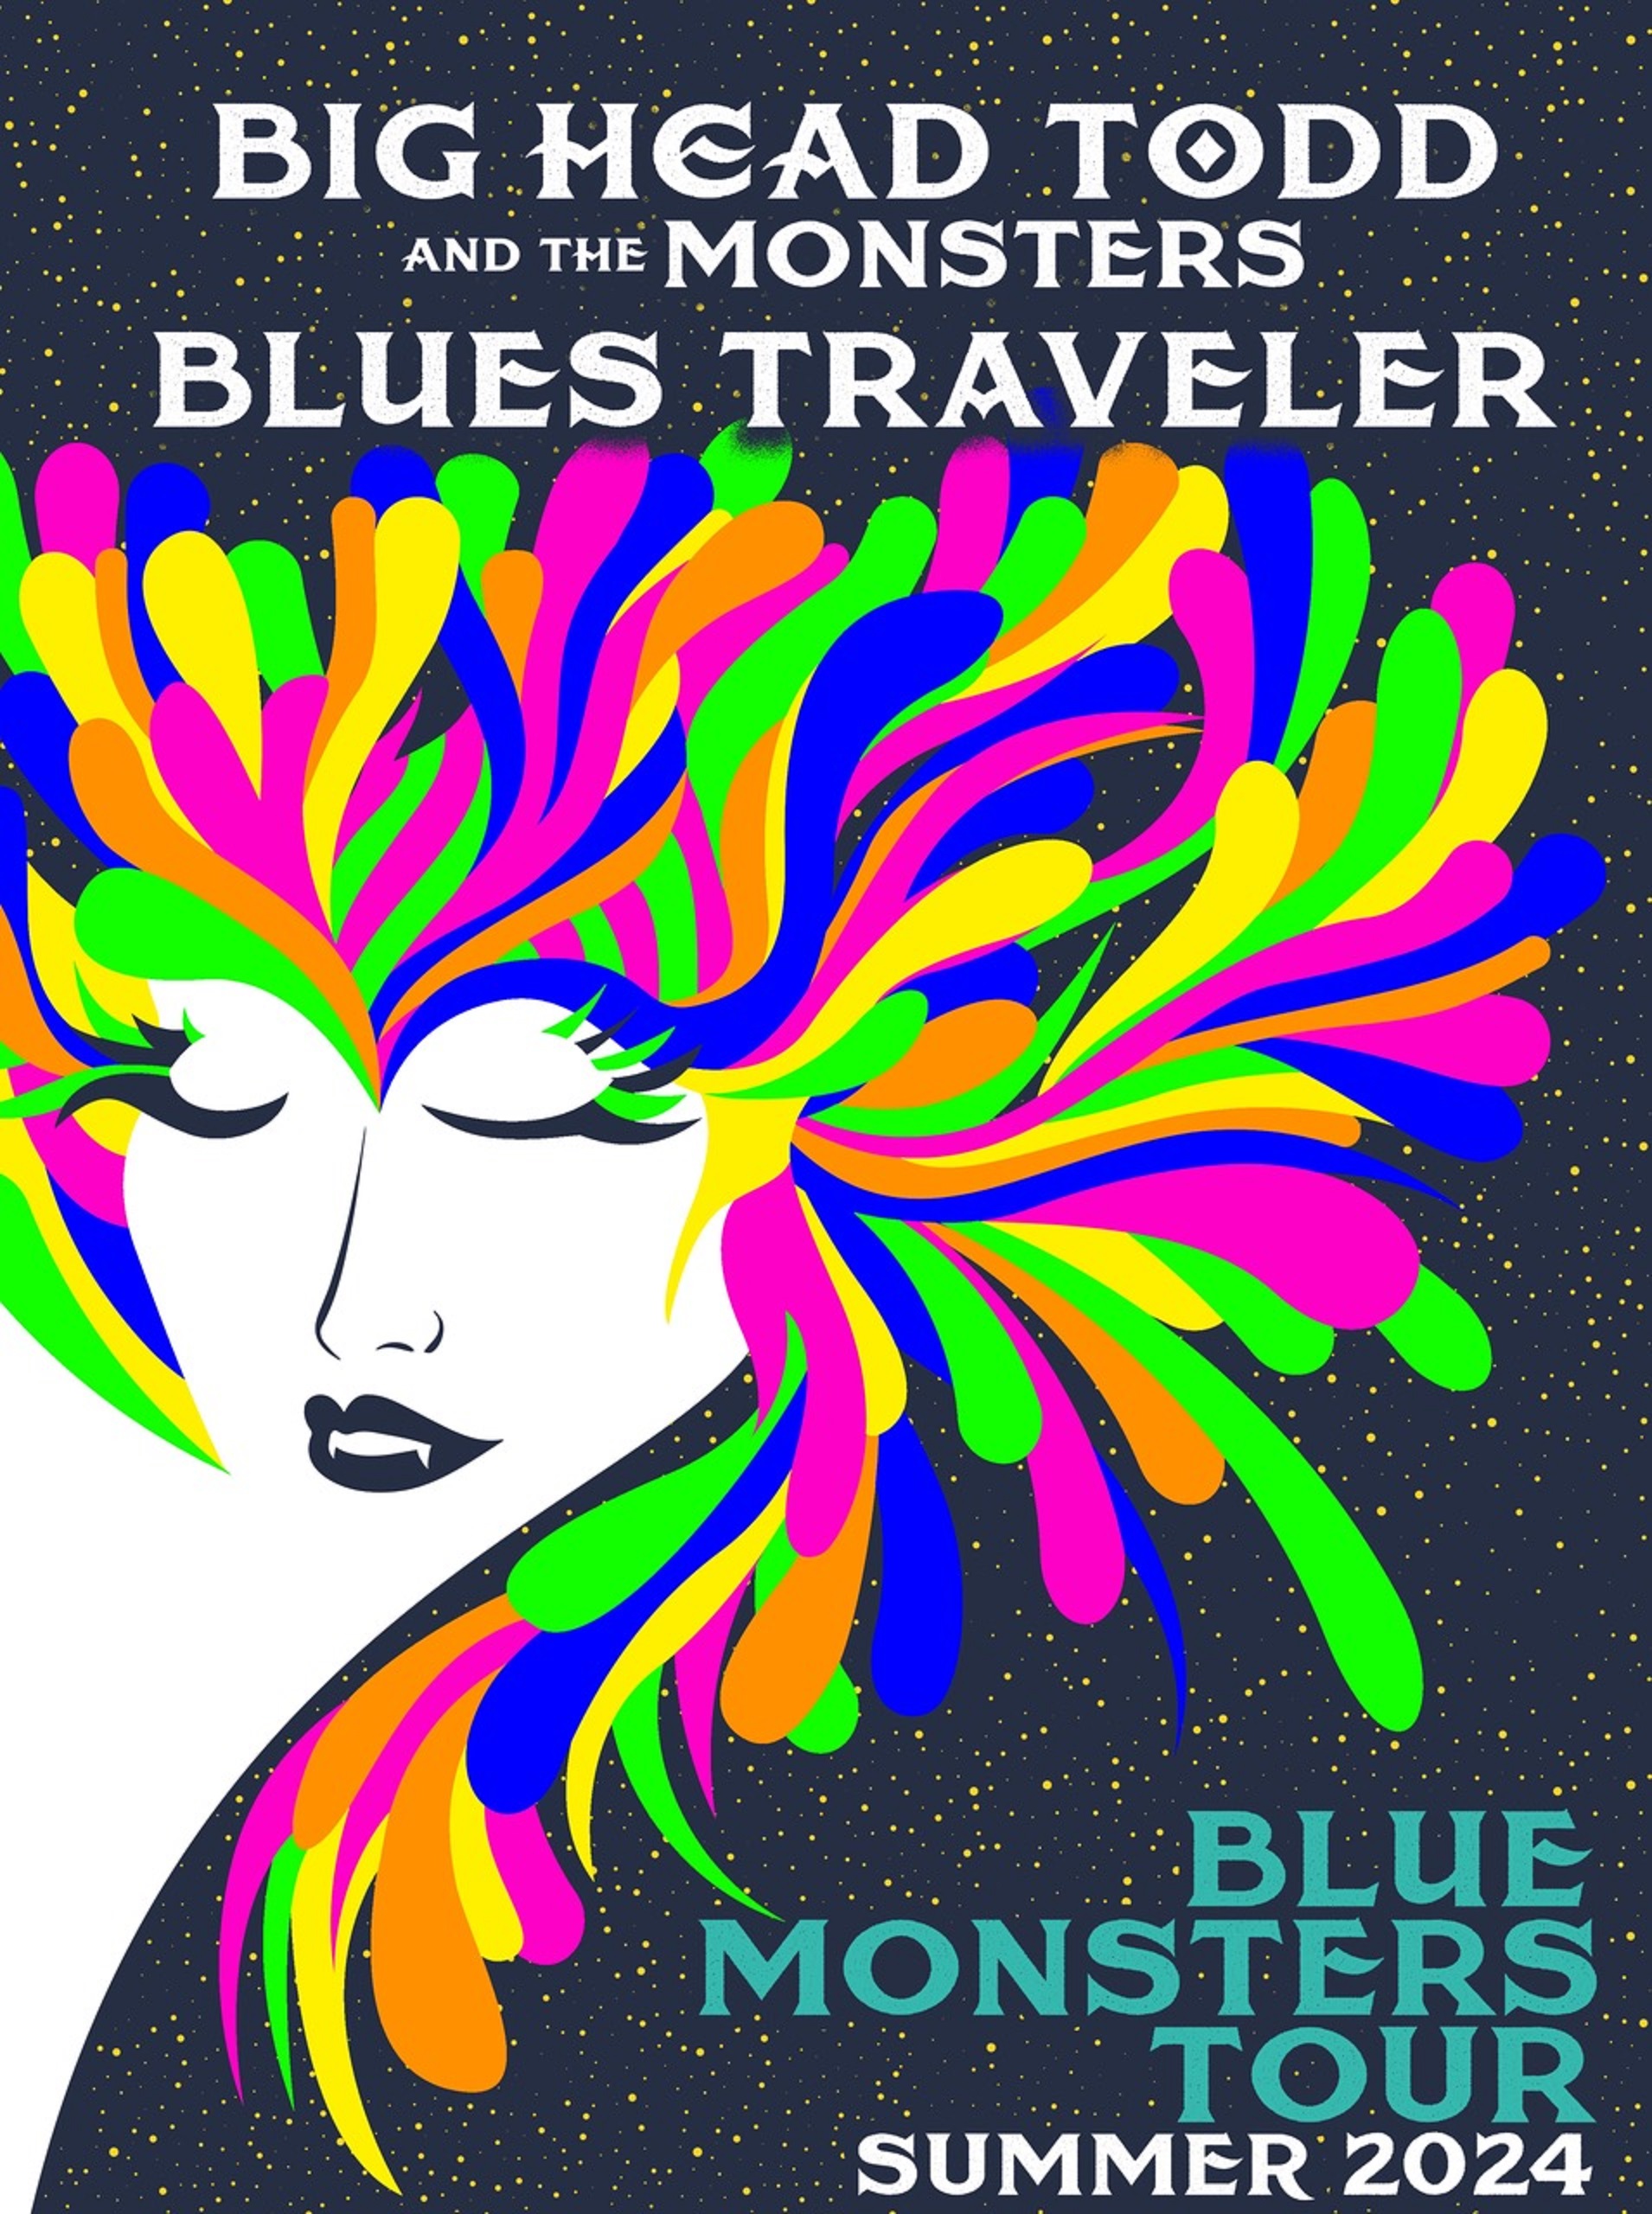 Blues Traveler & Big Head Todd and the Monsters Team Up for Epic Co-Headline Summer Tour